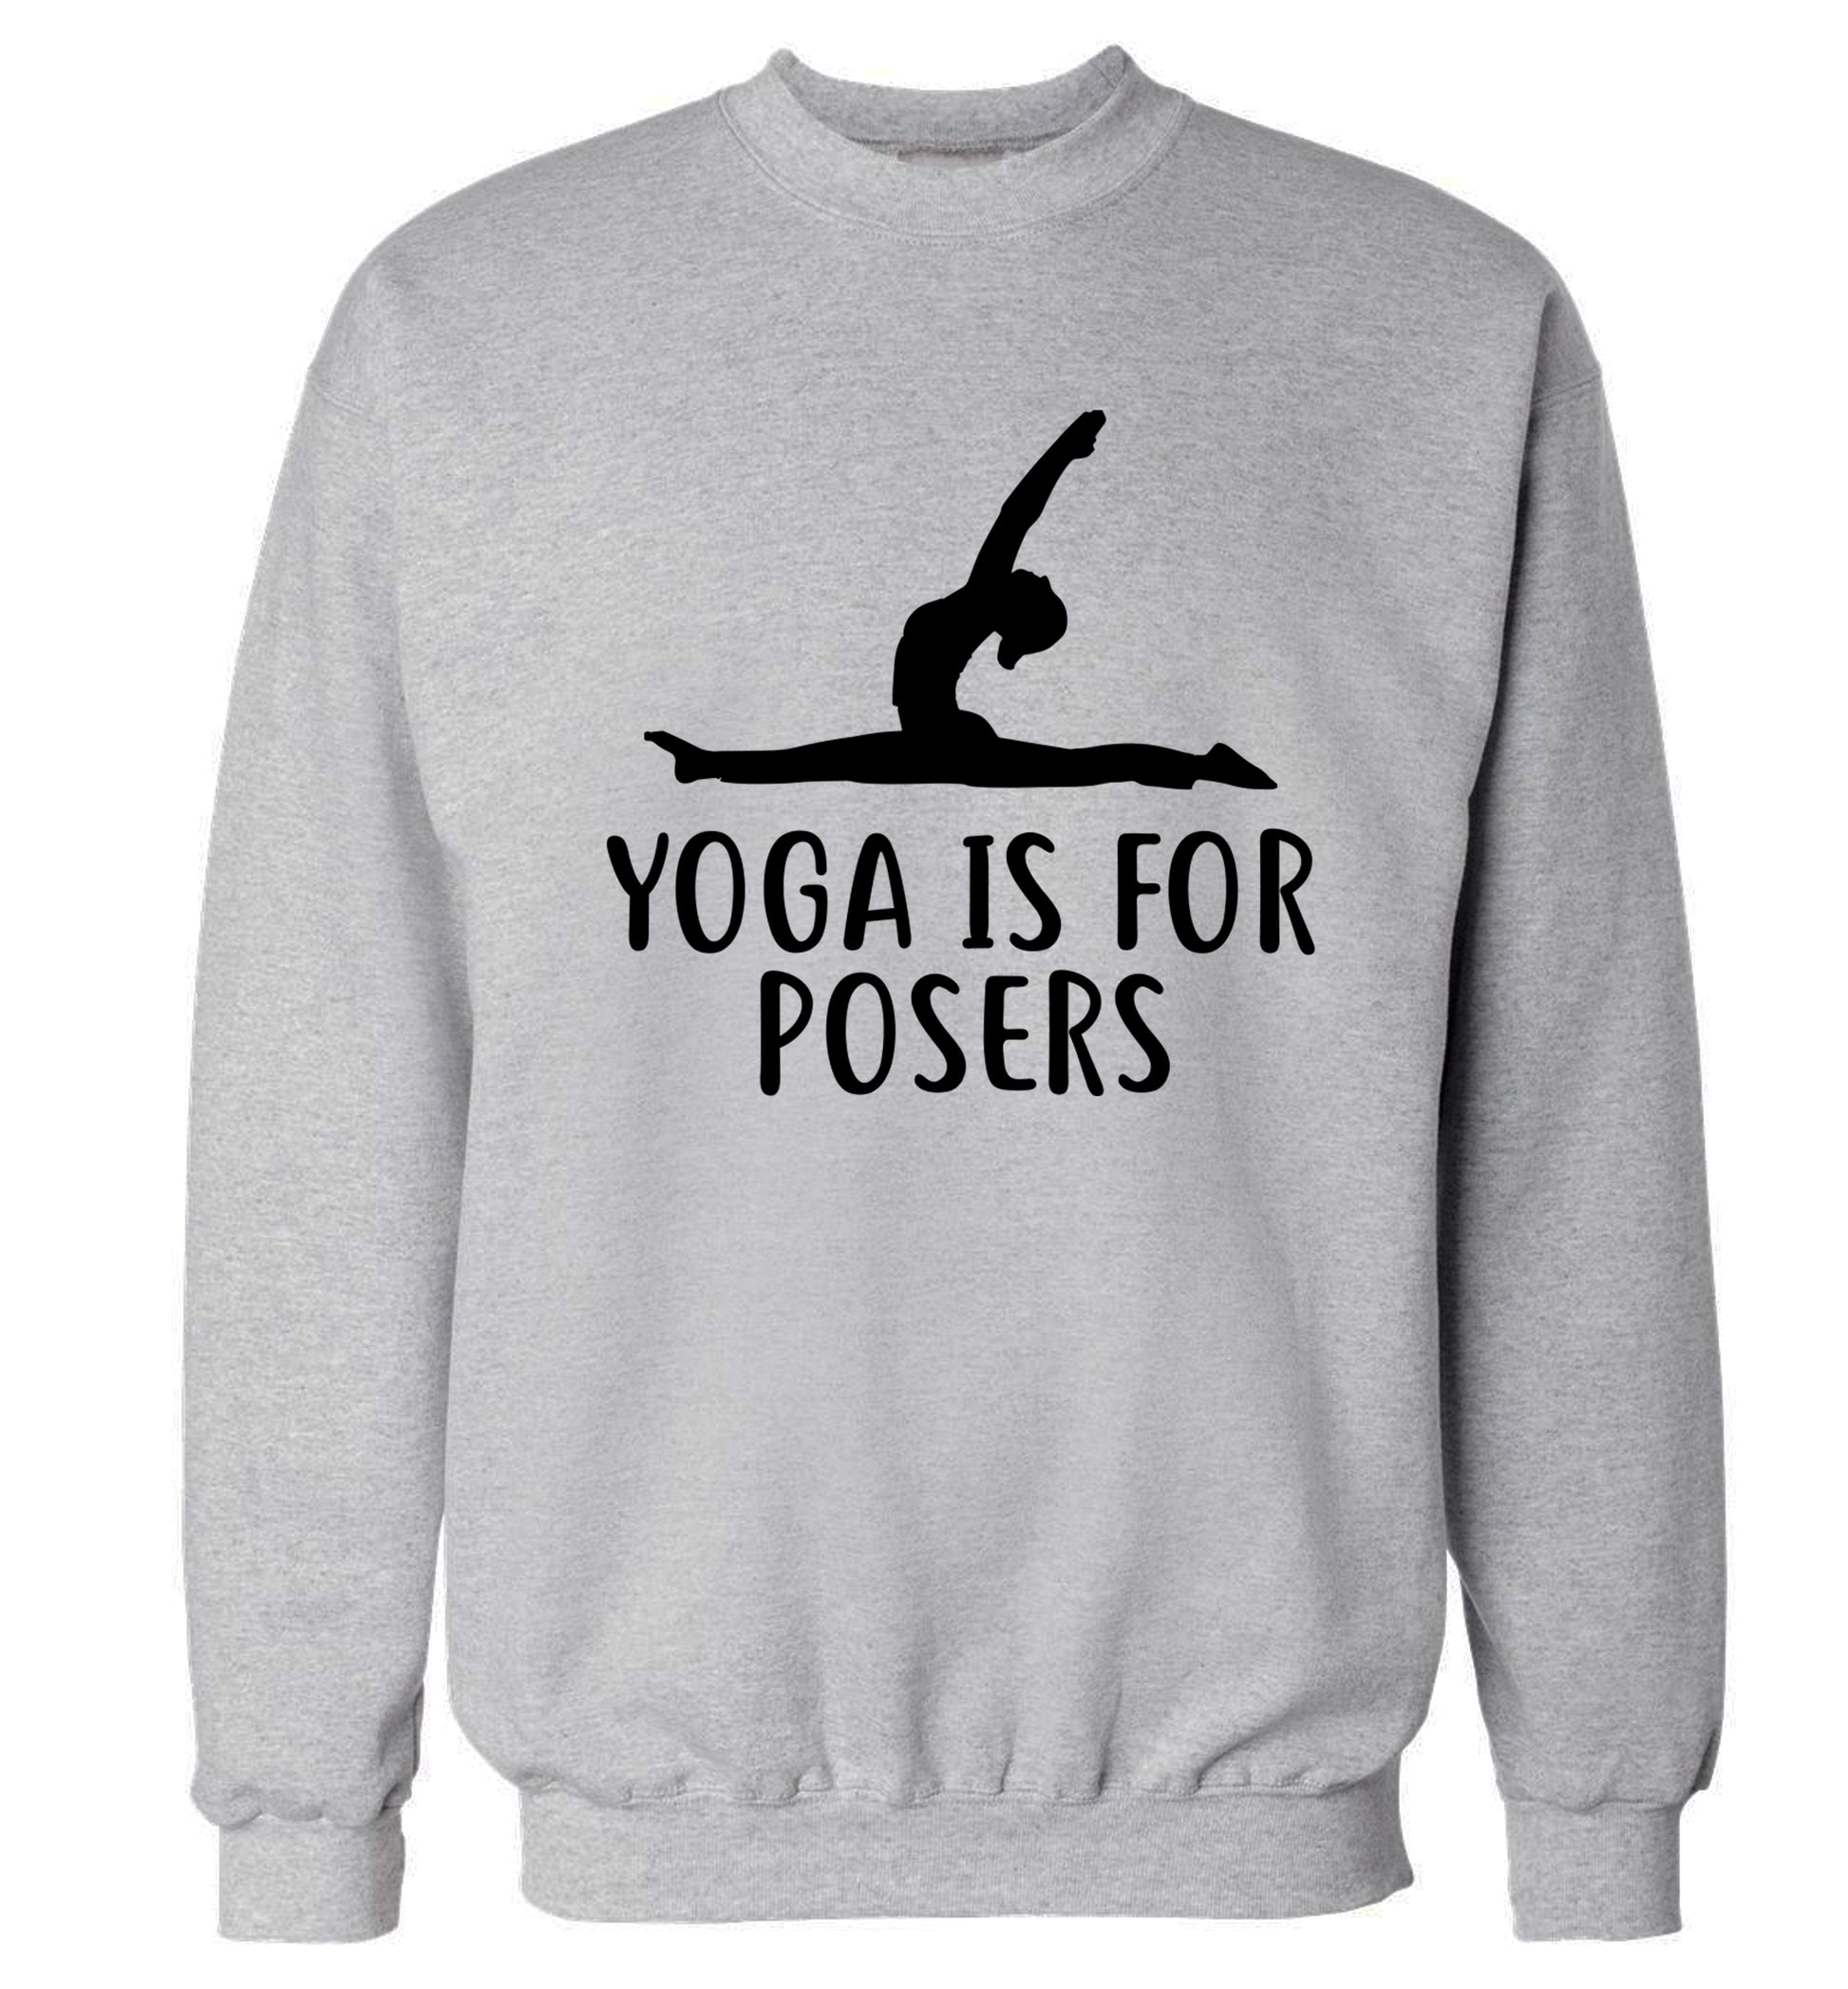 Yoga is for posers Adult's unisex grey Sweater 2XL